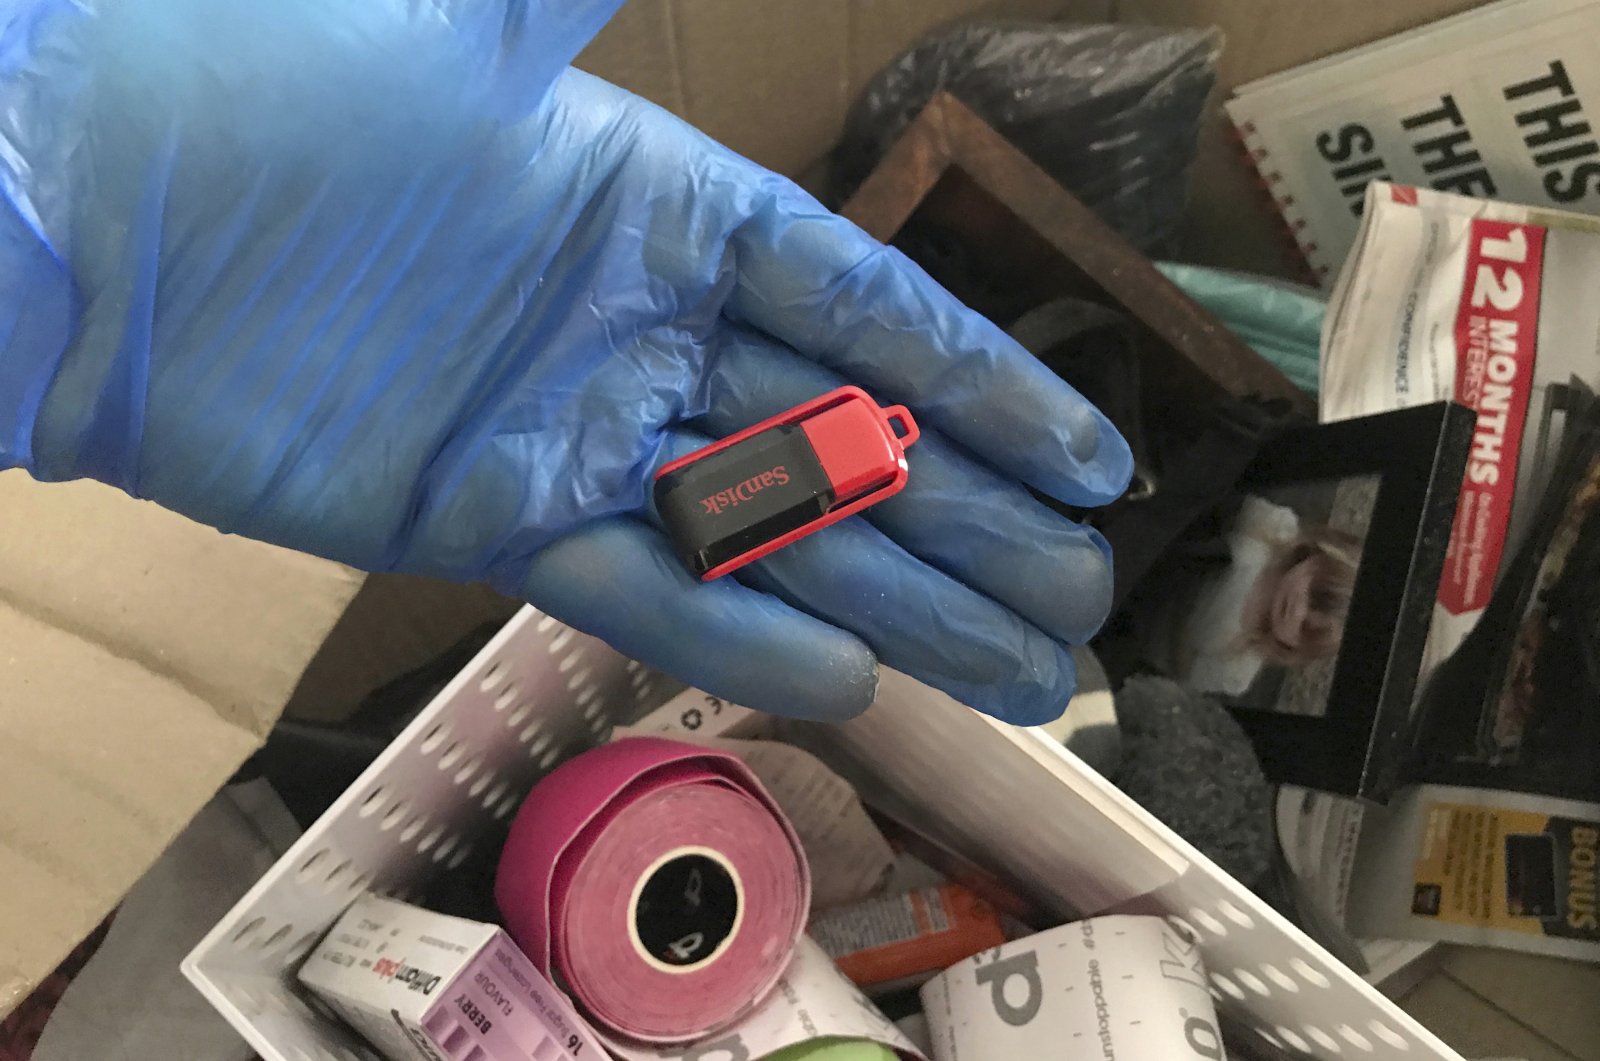 An investigator holds a thumb drive, part of materials that were seized during an investigation into a major child sex abuse ring, New South Wales, Australia, Nov. 11, 2020. (AP Photo)